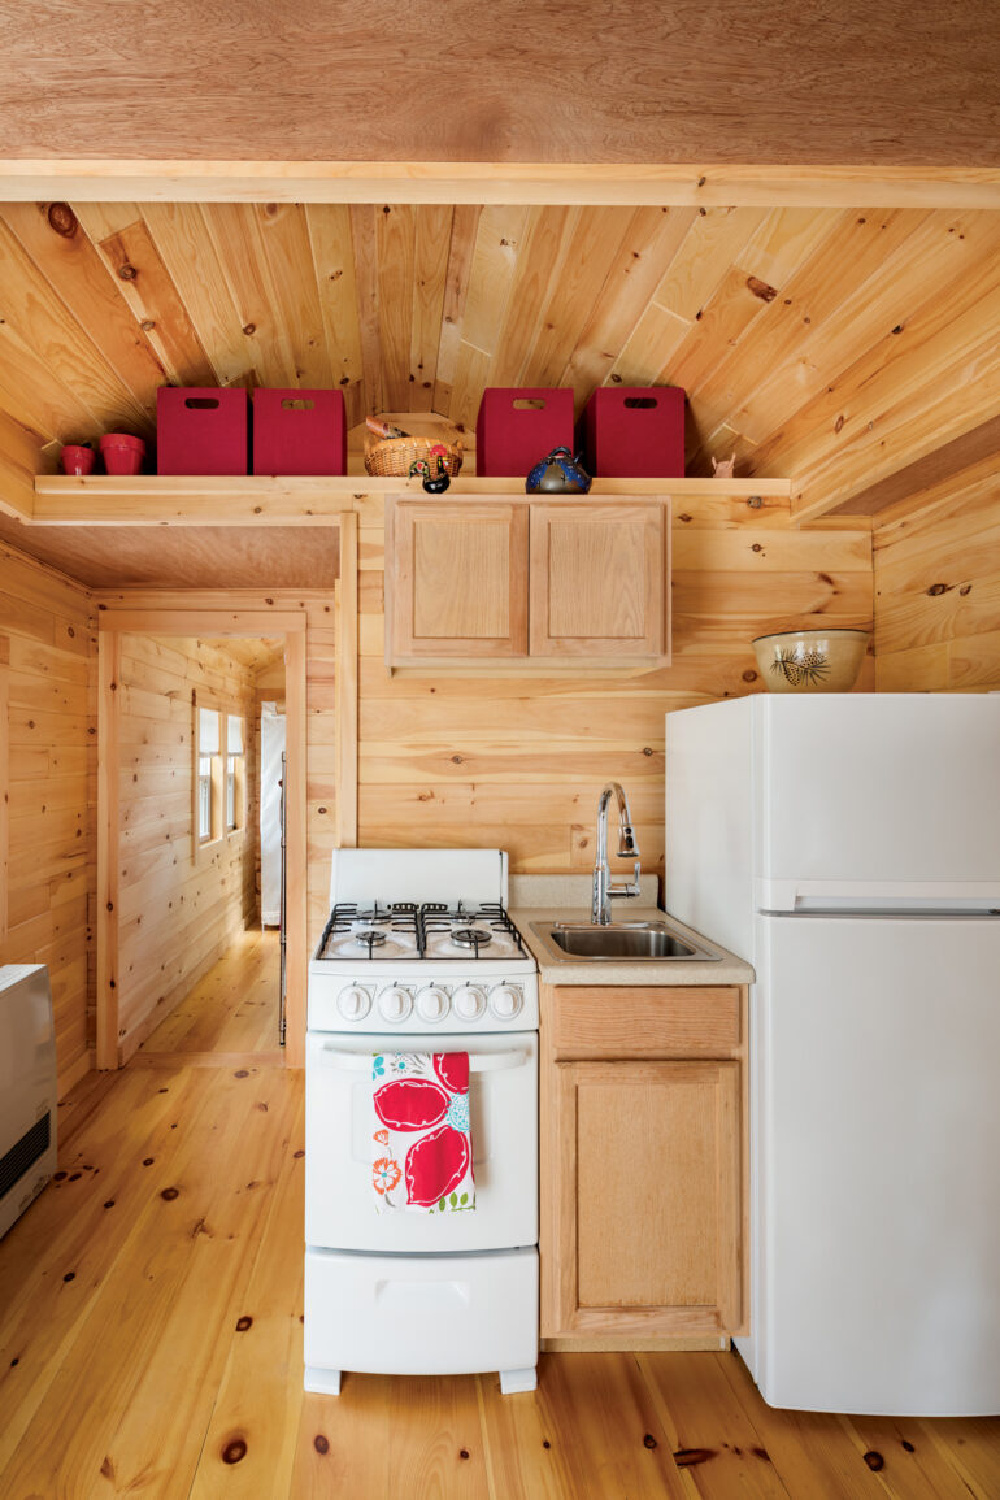 Knotty wood plank walls and ceilings in a tiny cottage in Maine - @downeast. #tinyhouseinteriors #rusticpaneling